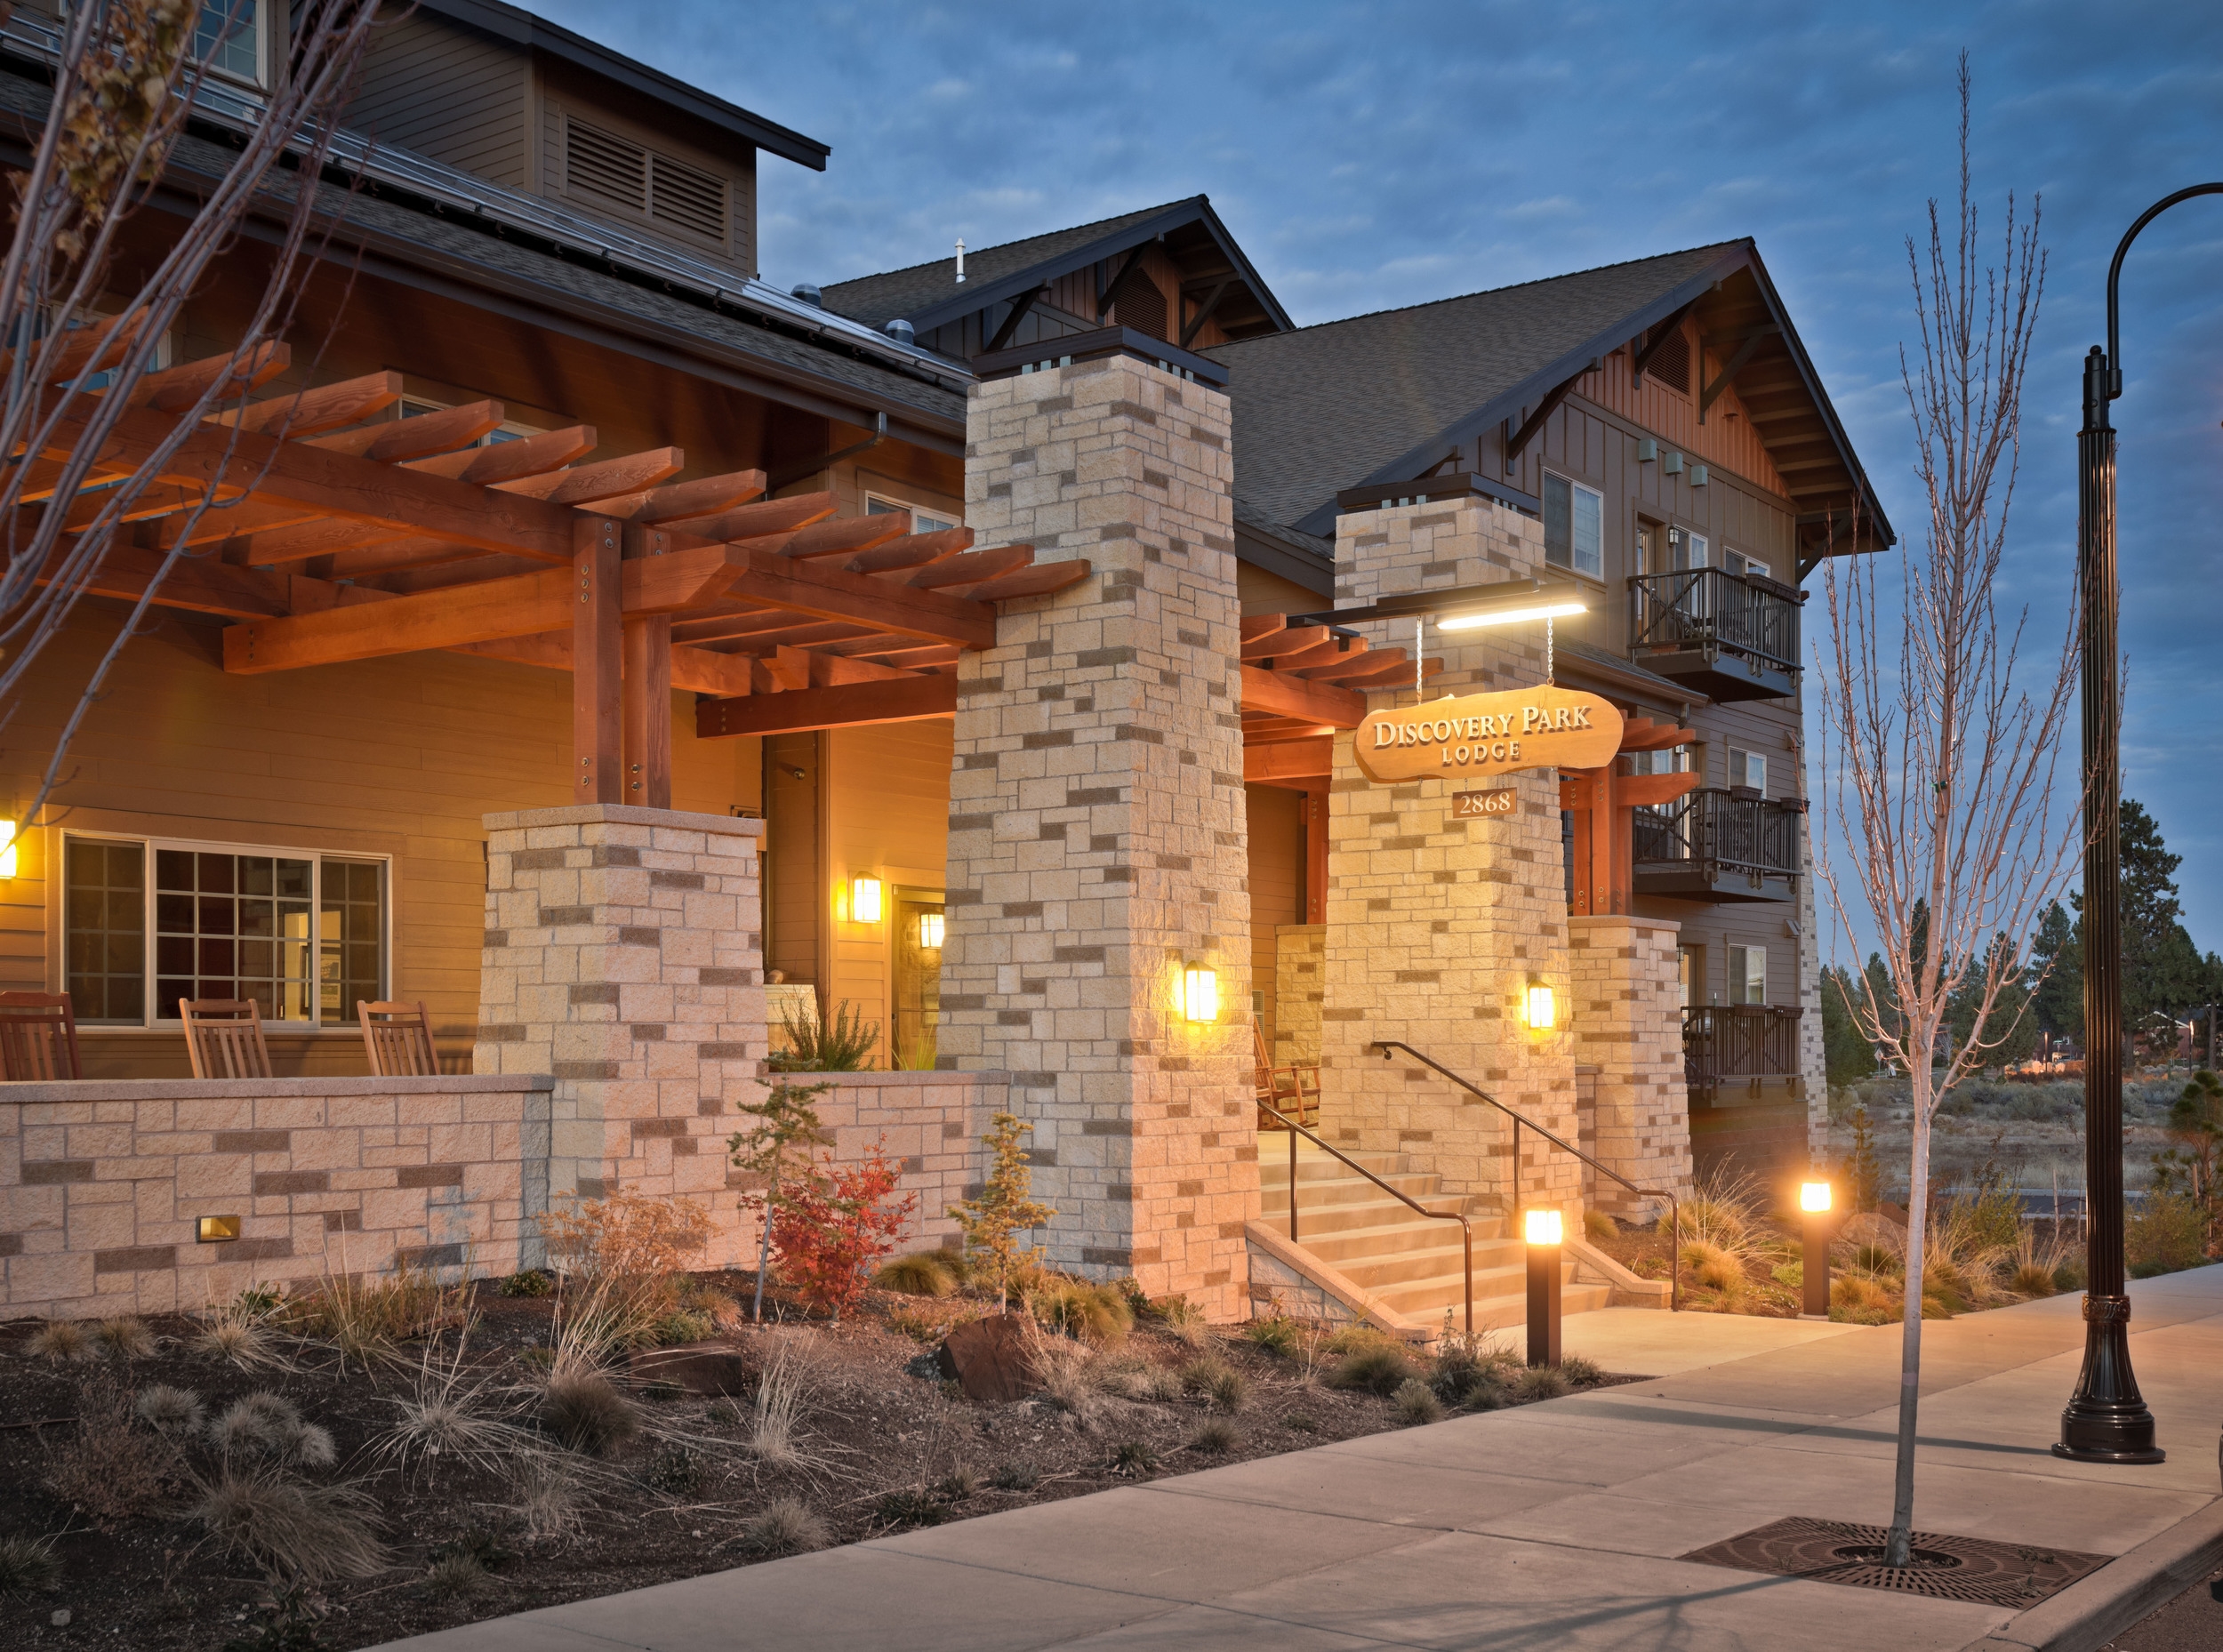 Discovery Park Lodge - entrance at evening.jpg